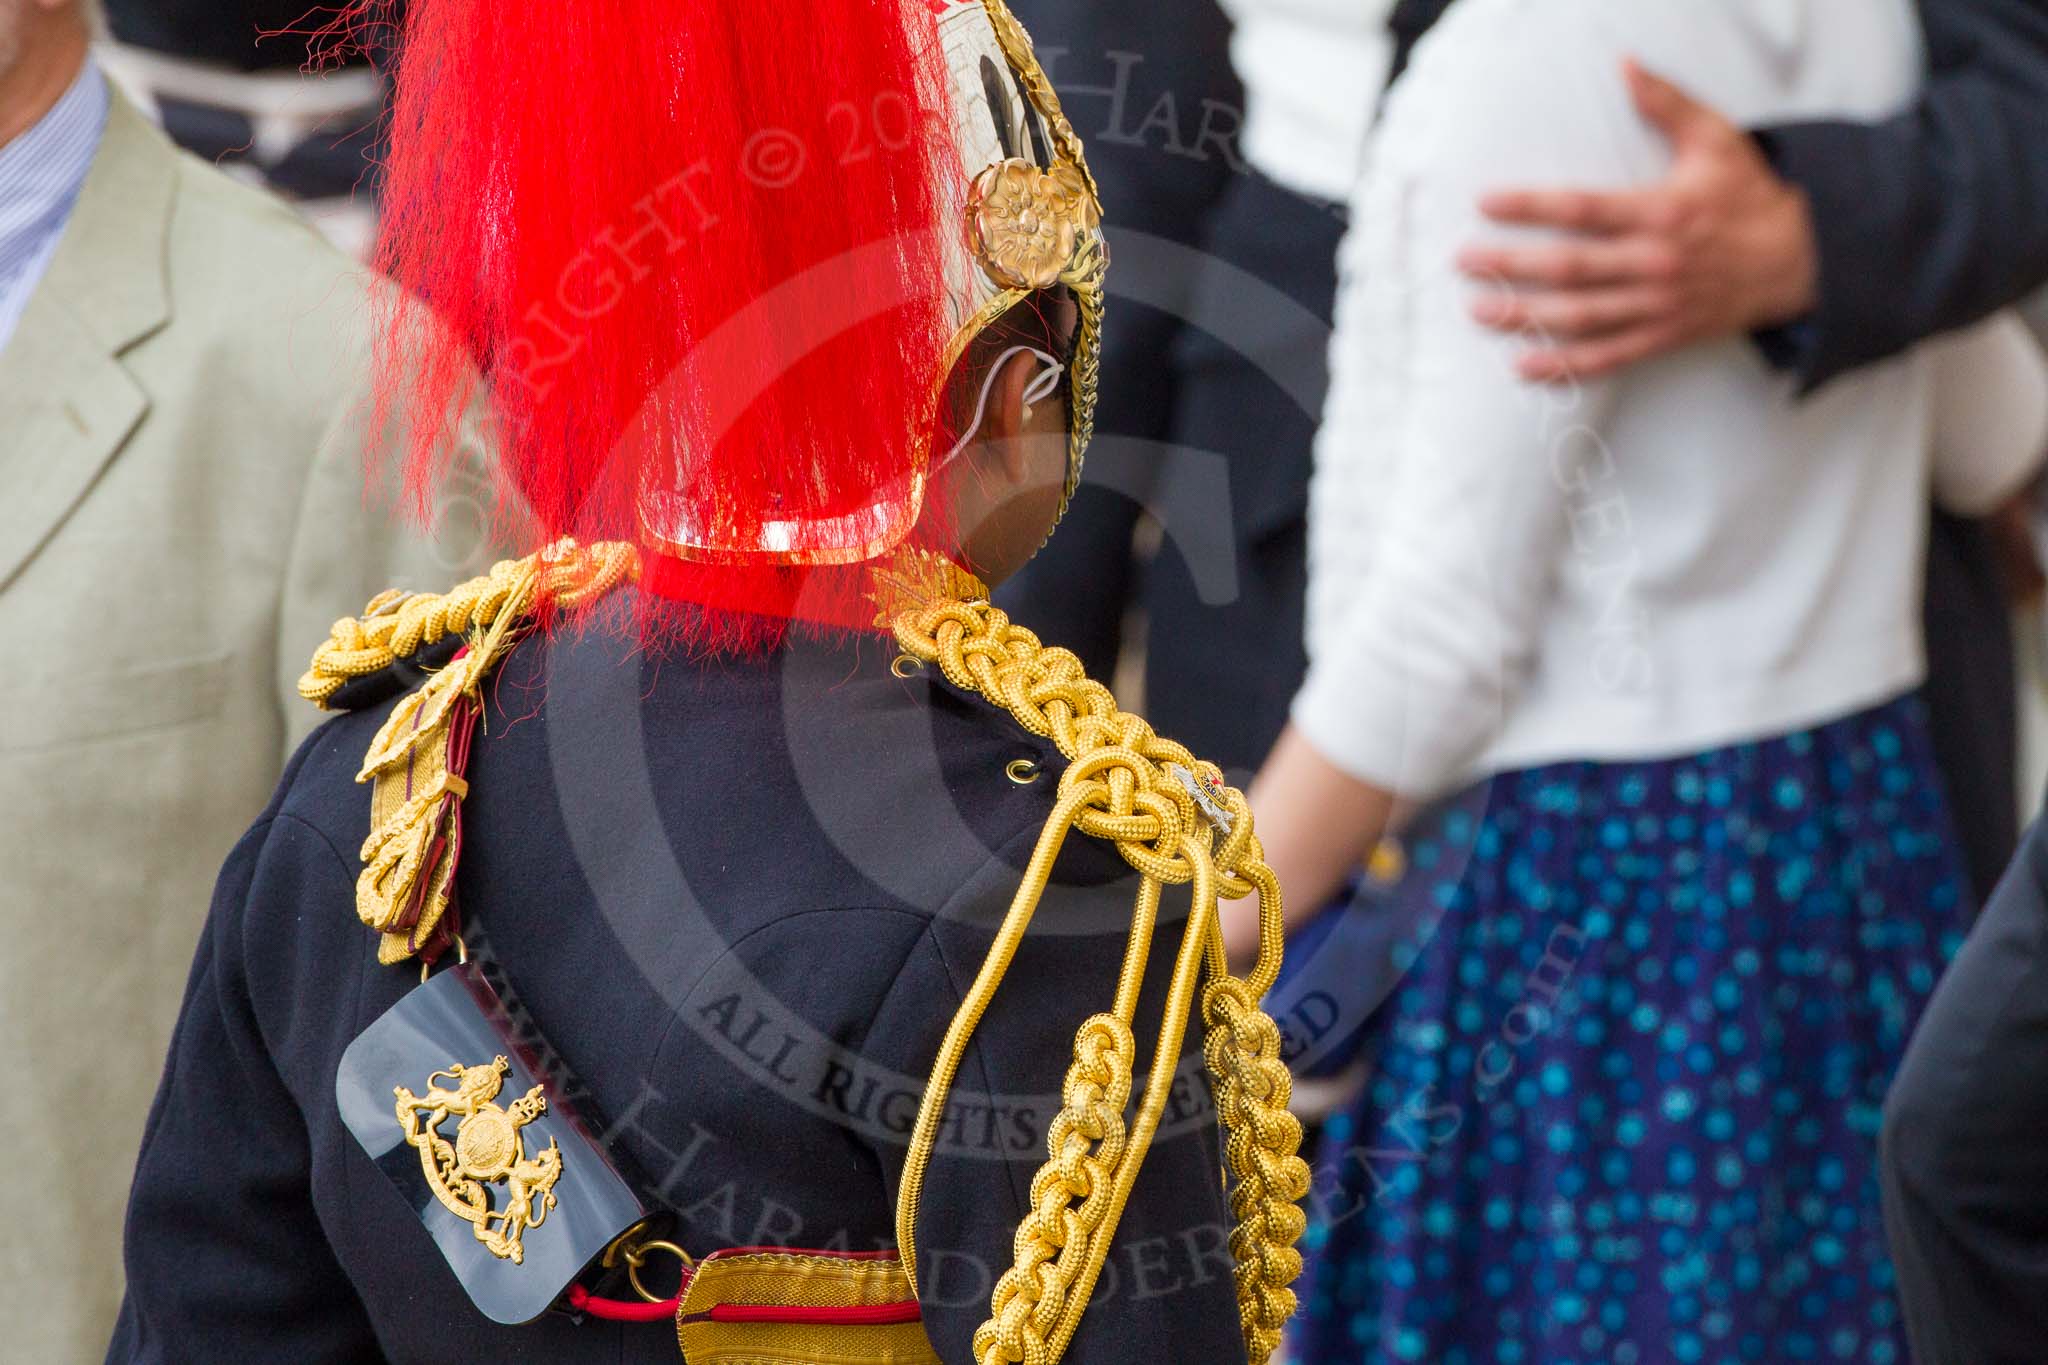 Trooping the Colour 2014.
Horse Guards Parade, Westminster,
London SW1A,

United Kingdom,
on 14 June 2014 at 12:32, image #963